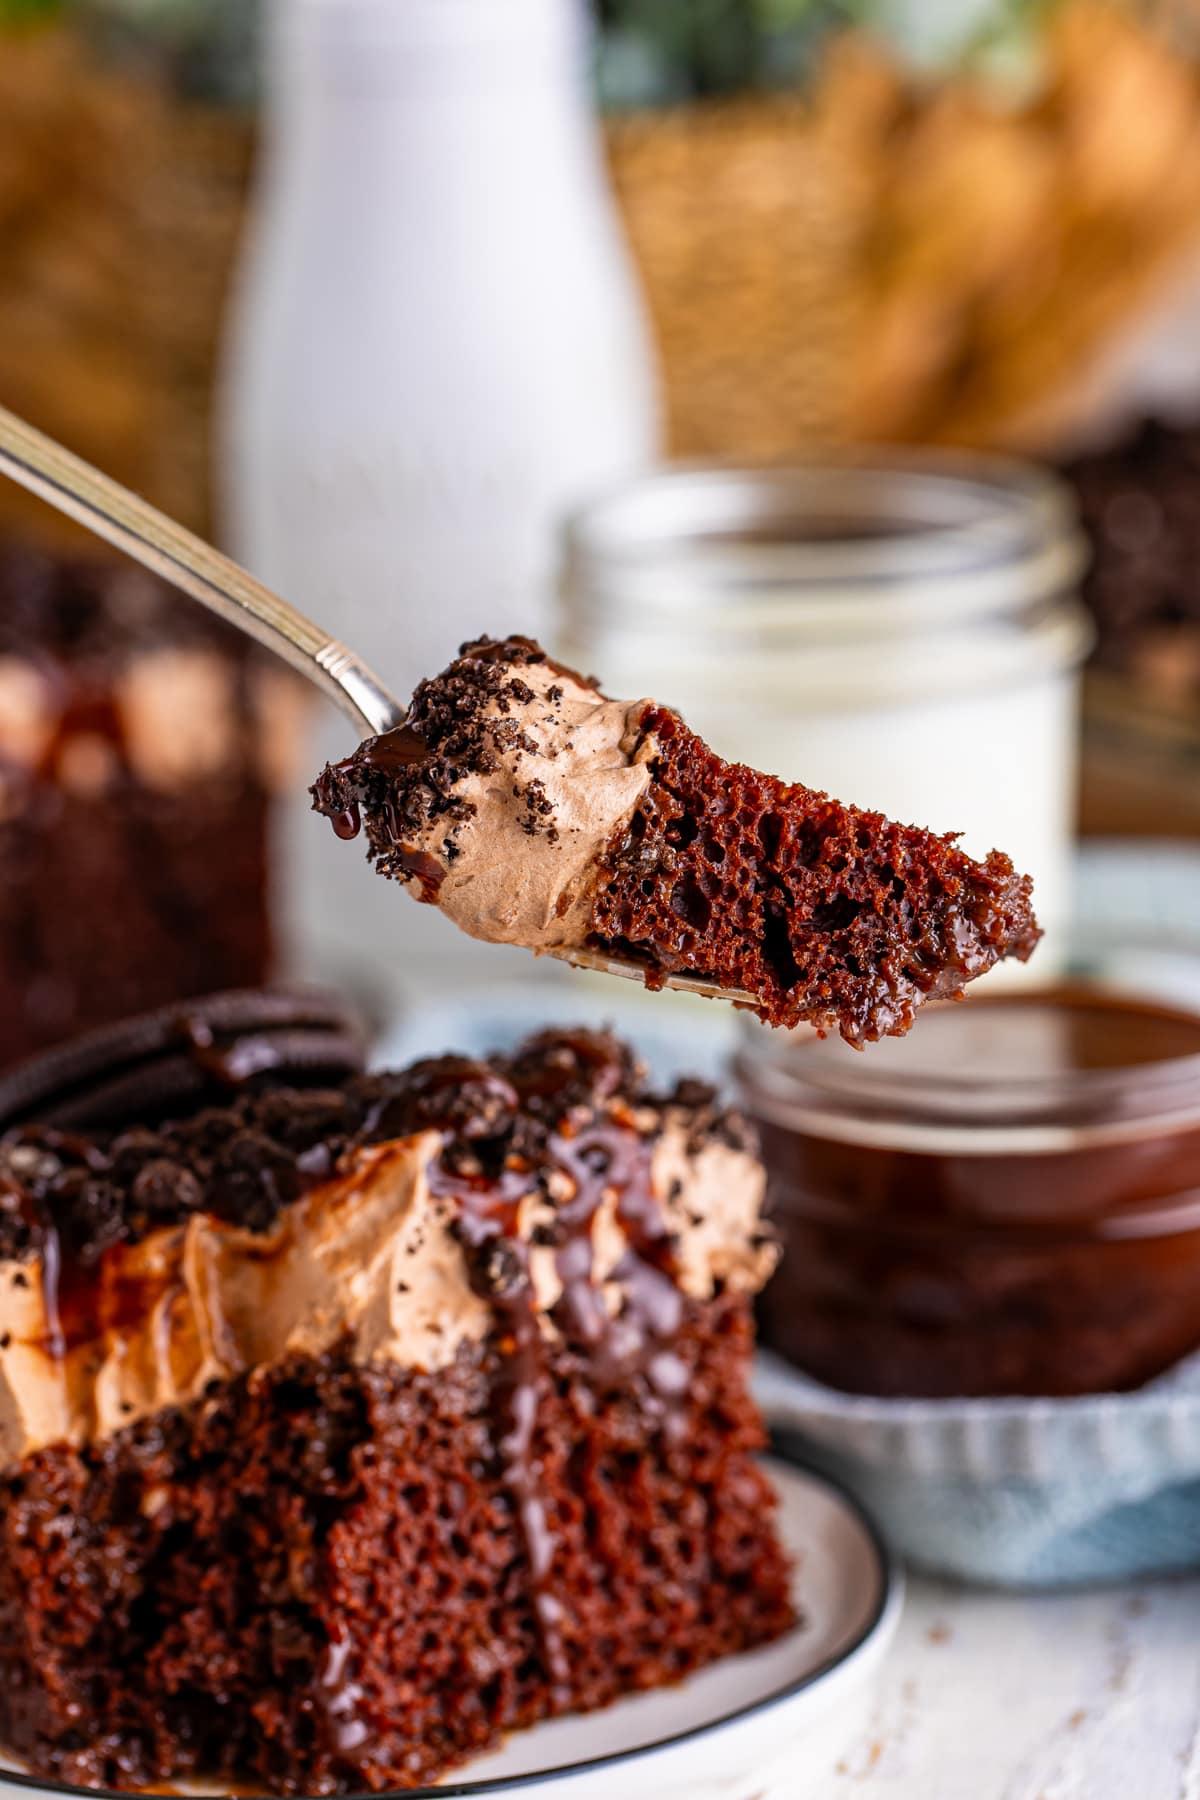 A bite of Cake on a fork.